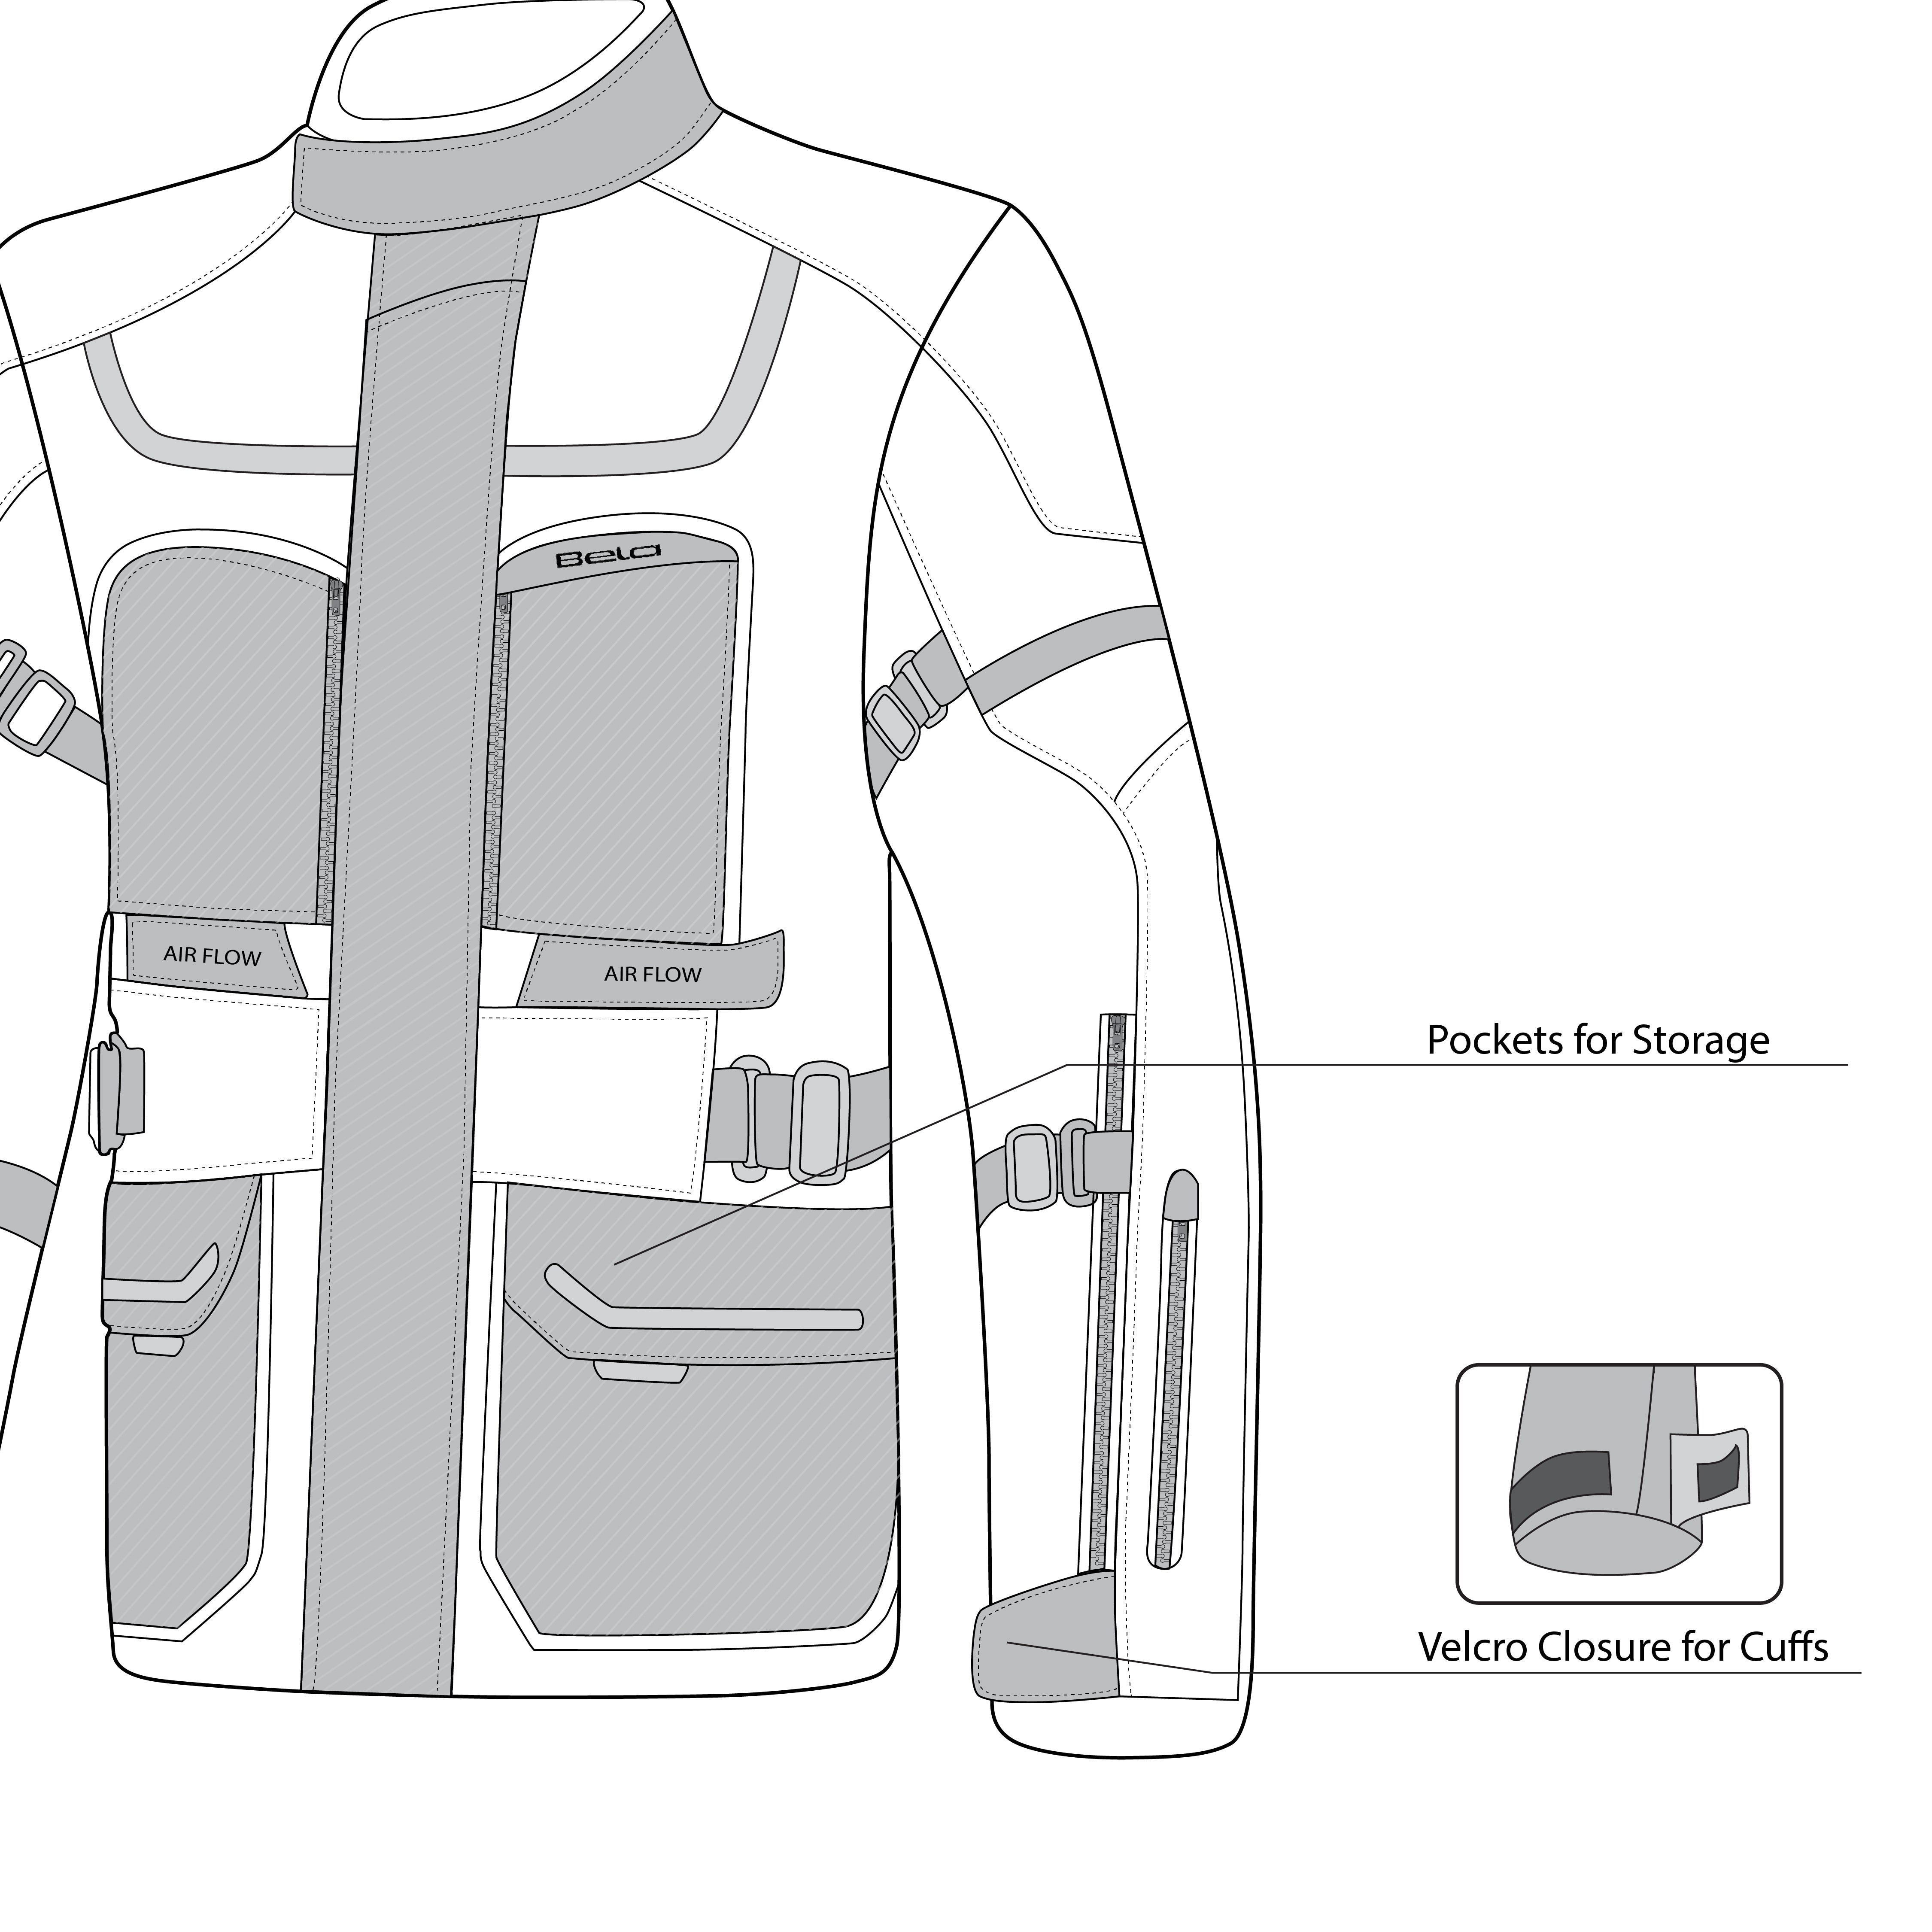 infographic sketch bela transformer the winter jacket black and red front bottom side view